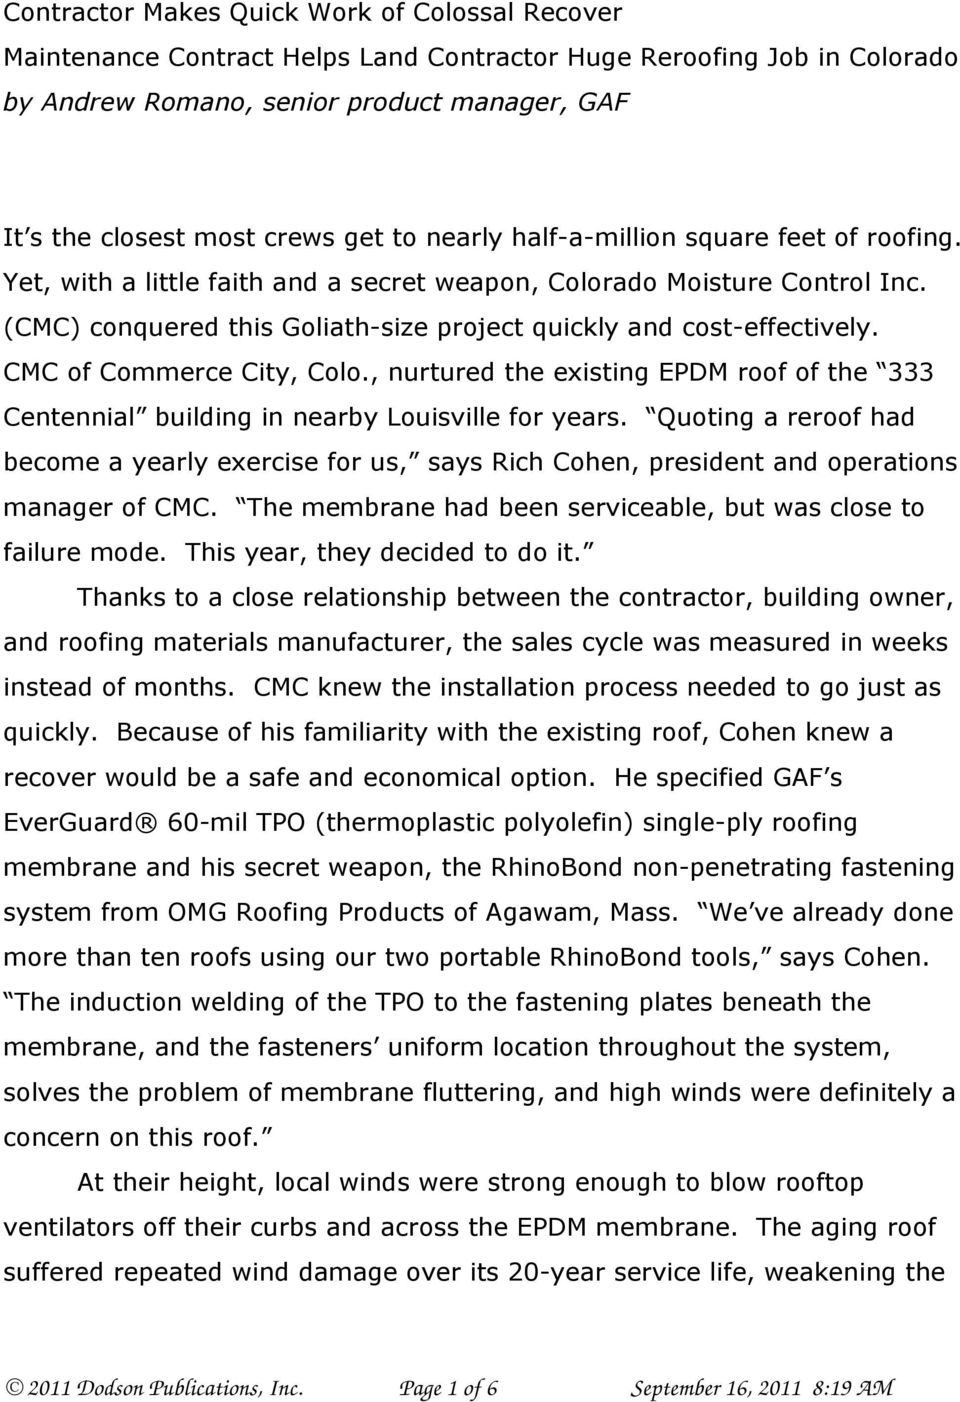 CMC of Commerce City, Colo., nurtured the existing EPDM roof of the 333 Centennial building in nearby Louisville for years.